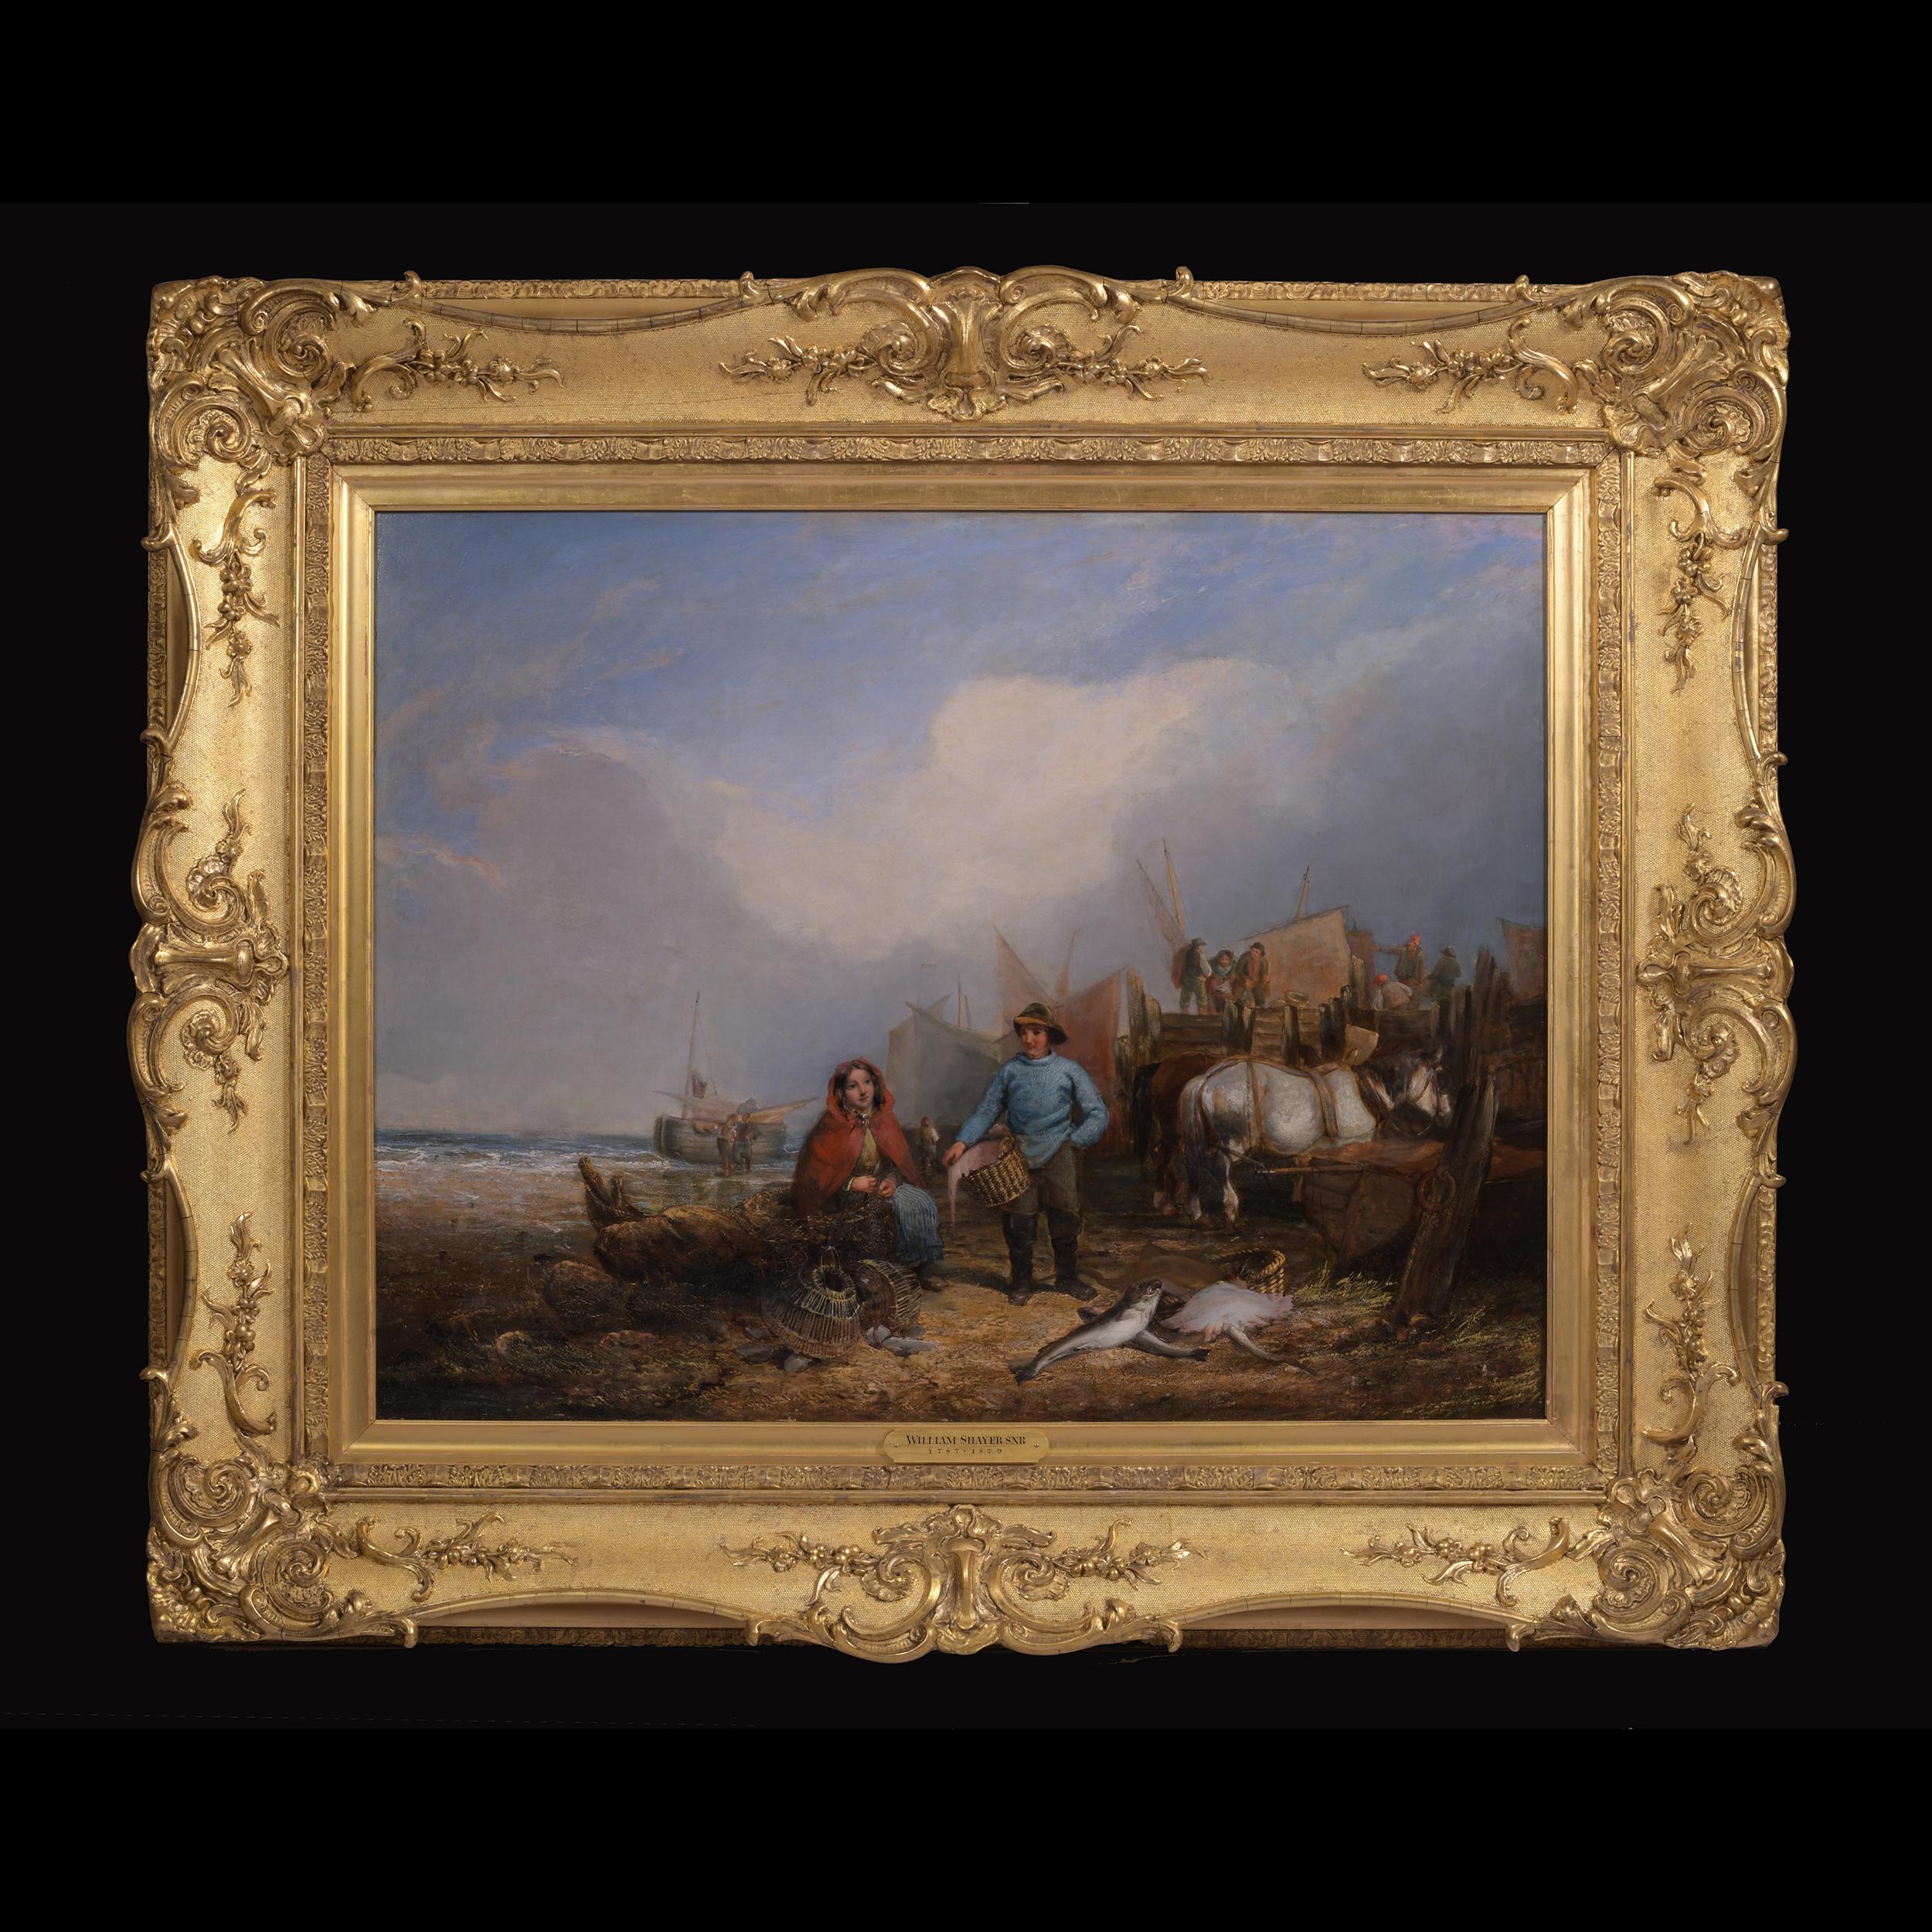 Artist: William Shayer Snr (British) 1787 - 1879

Medium: Oil on canvas in its original gilt frame

Title: Unloading the catch

Canvas Size: H: 28 in / 71.2 cm ; W: 36 in / 91.5 cm

Framed Size: H: 49 in / 124.5 cm ; W: 41 in / 104.2